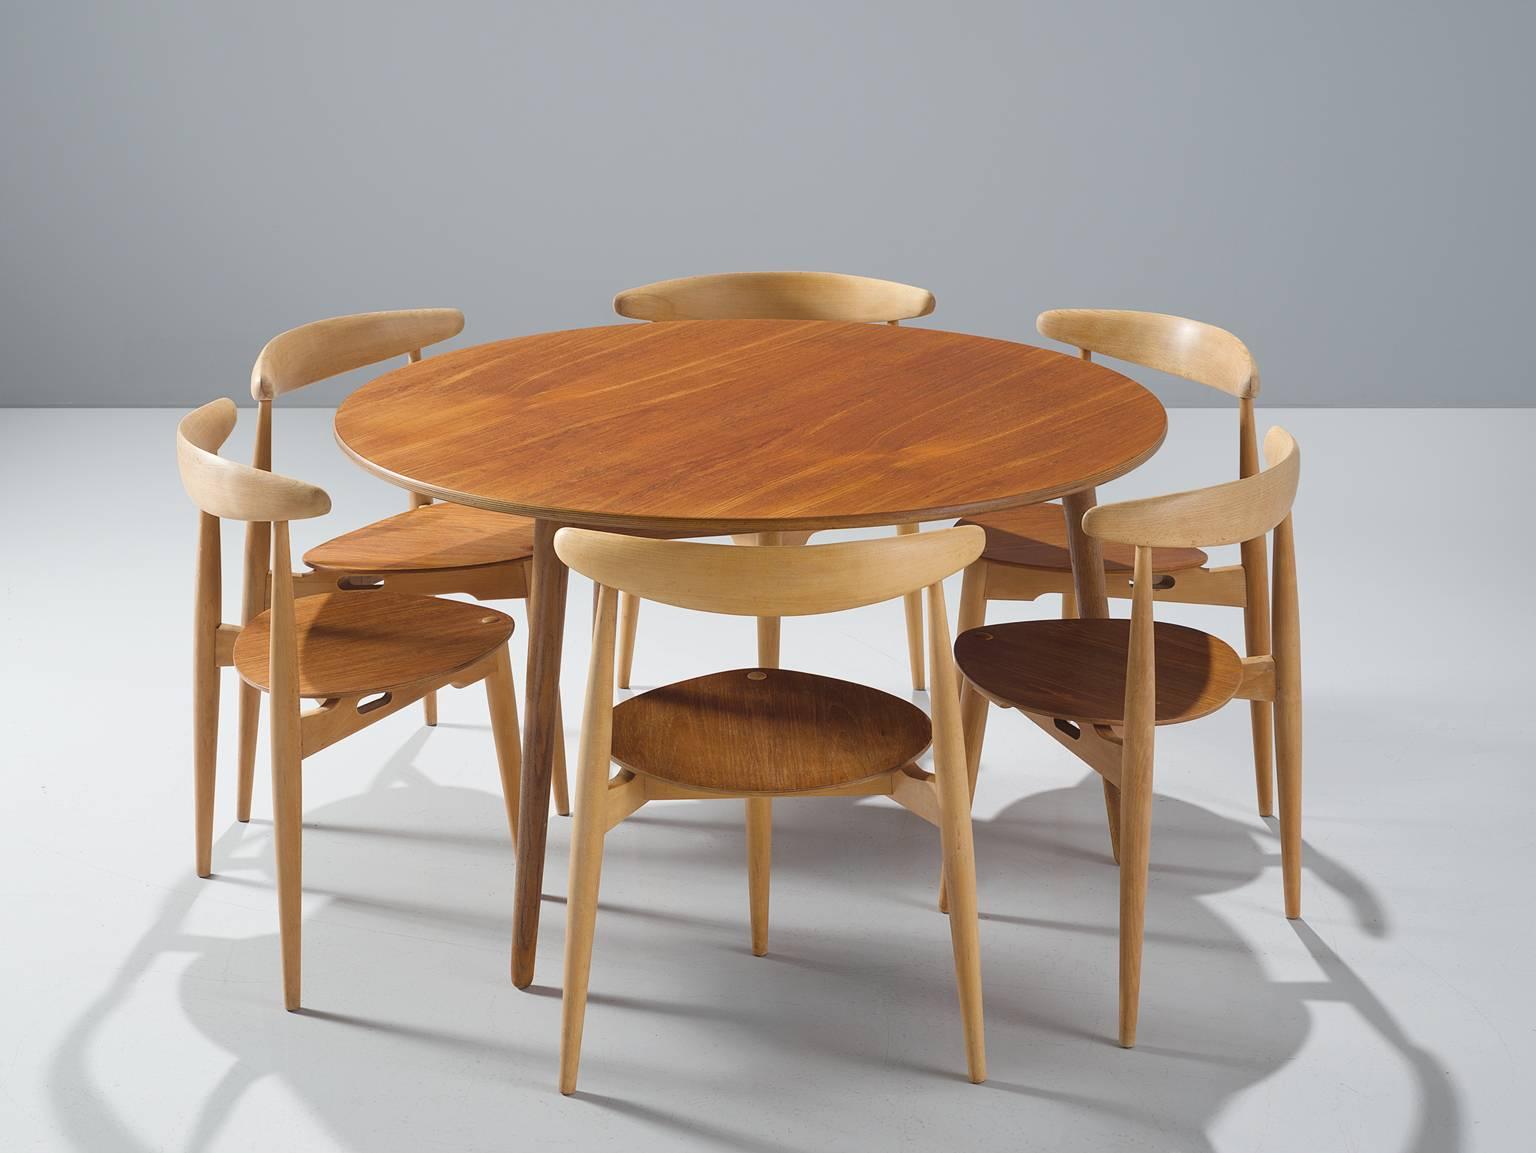 Heart set by Hans Wegner for Fritz Hansen, beech and teak, Denmark, 1953.

This set is part of the midcentury collection. The chairs by Hans Wegner are designed to sit flush against a table. The chairs have only three legs, so they can be shoved